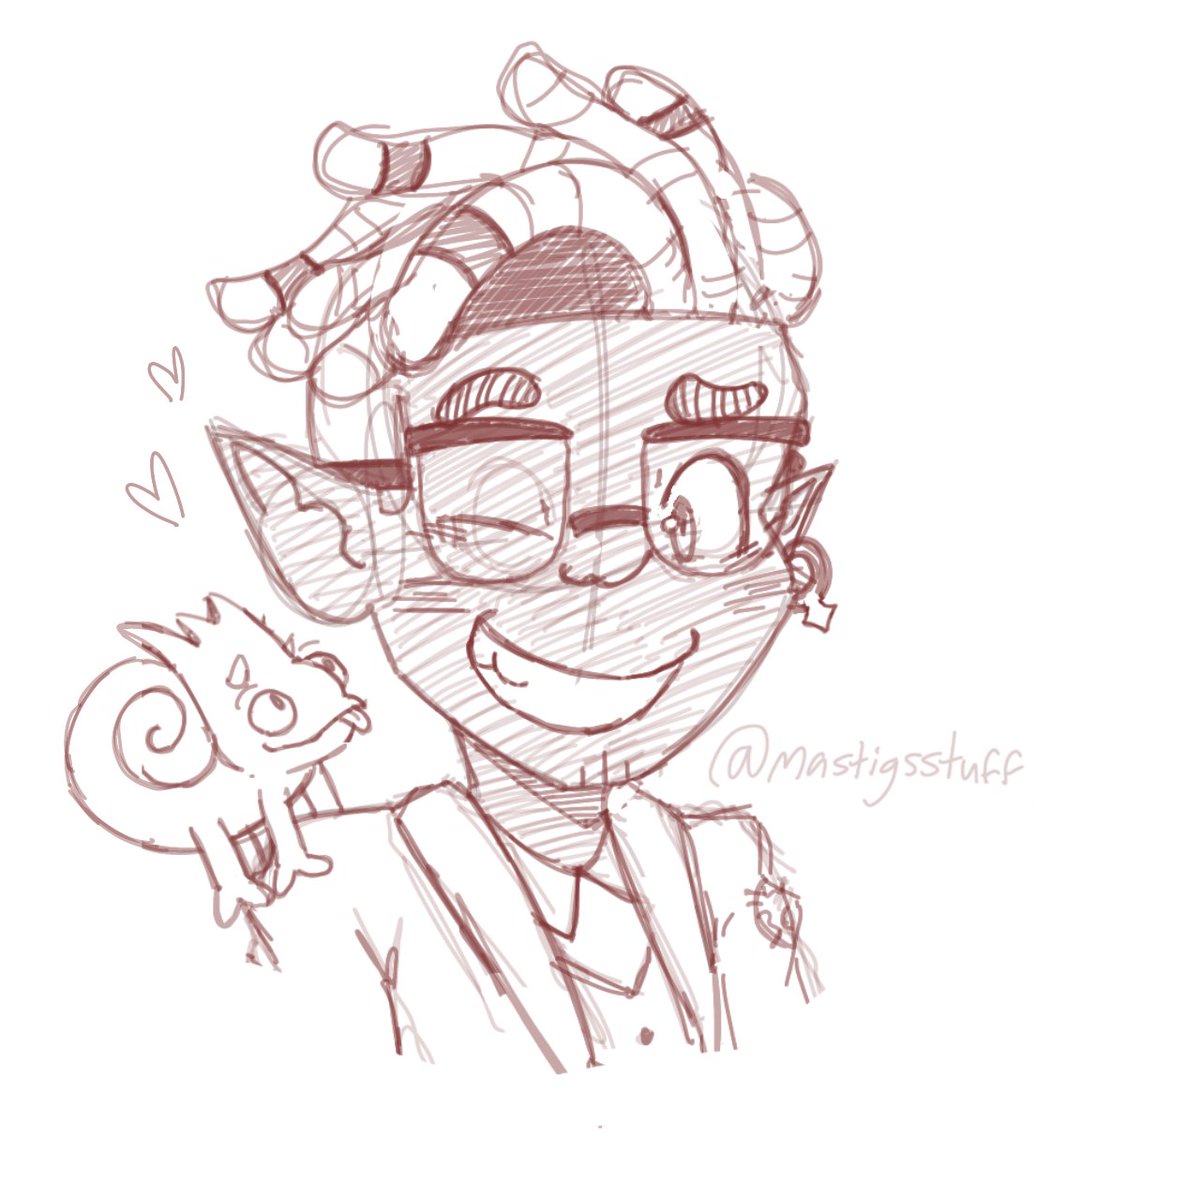 gus porter sketch?

#gusporter #gusporters3 #toh #tohs3 #theowlhouses3 #theowlhouse